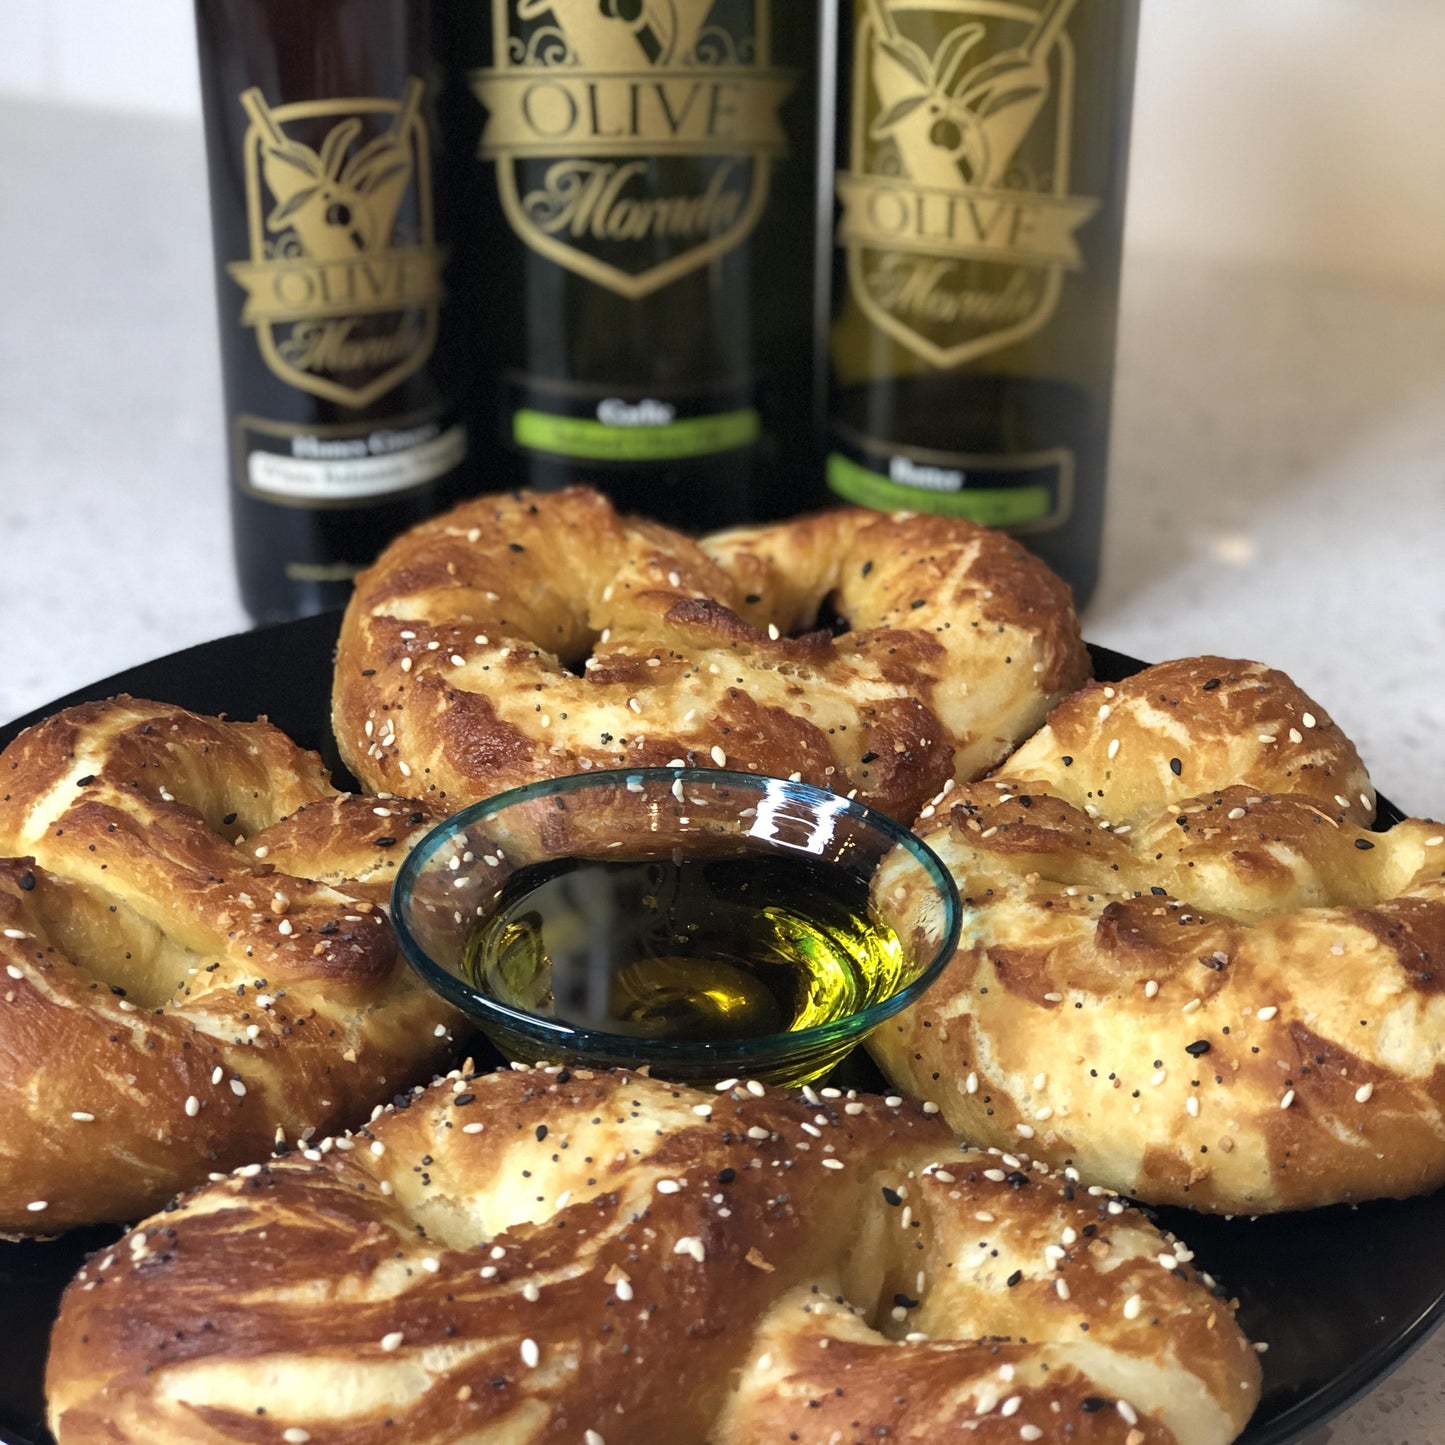 Buttery Soft Pretzels made with Olive Morada Olive Oil